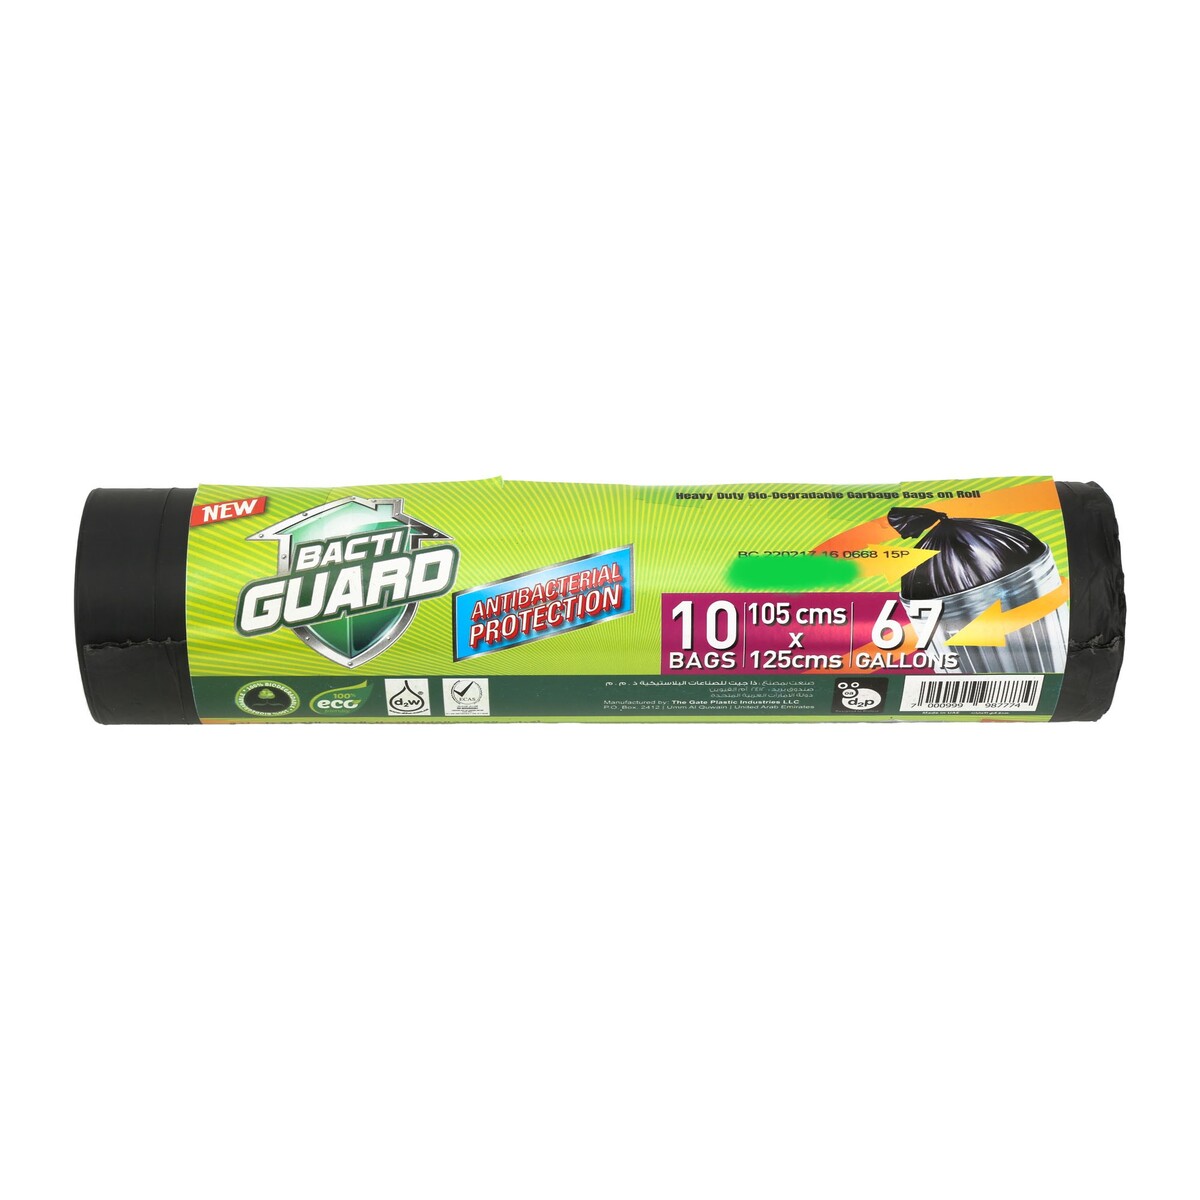 Bacti Guard Anti-Bacterial Heavy Duty Garbage Bags 67 Gallons Size 105cms x 125cms 10pcs